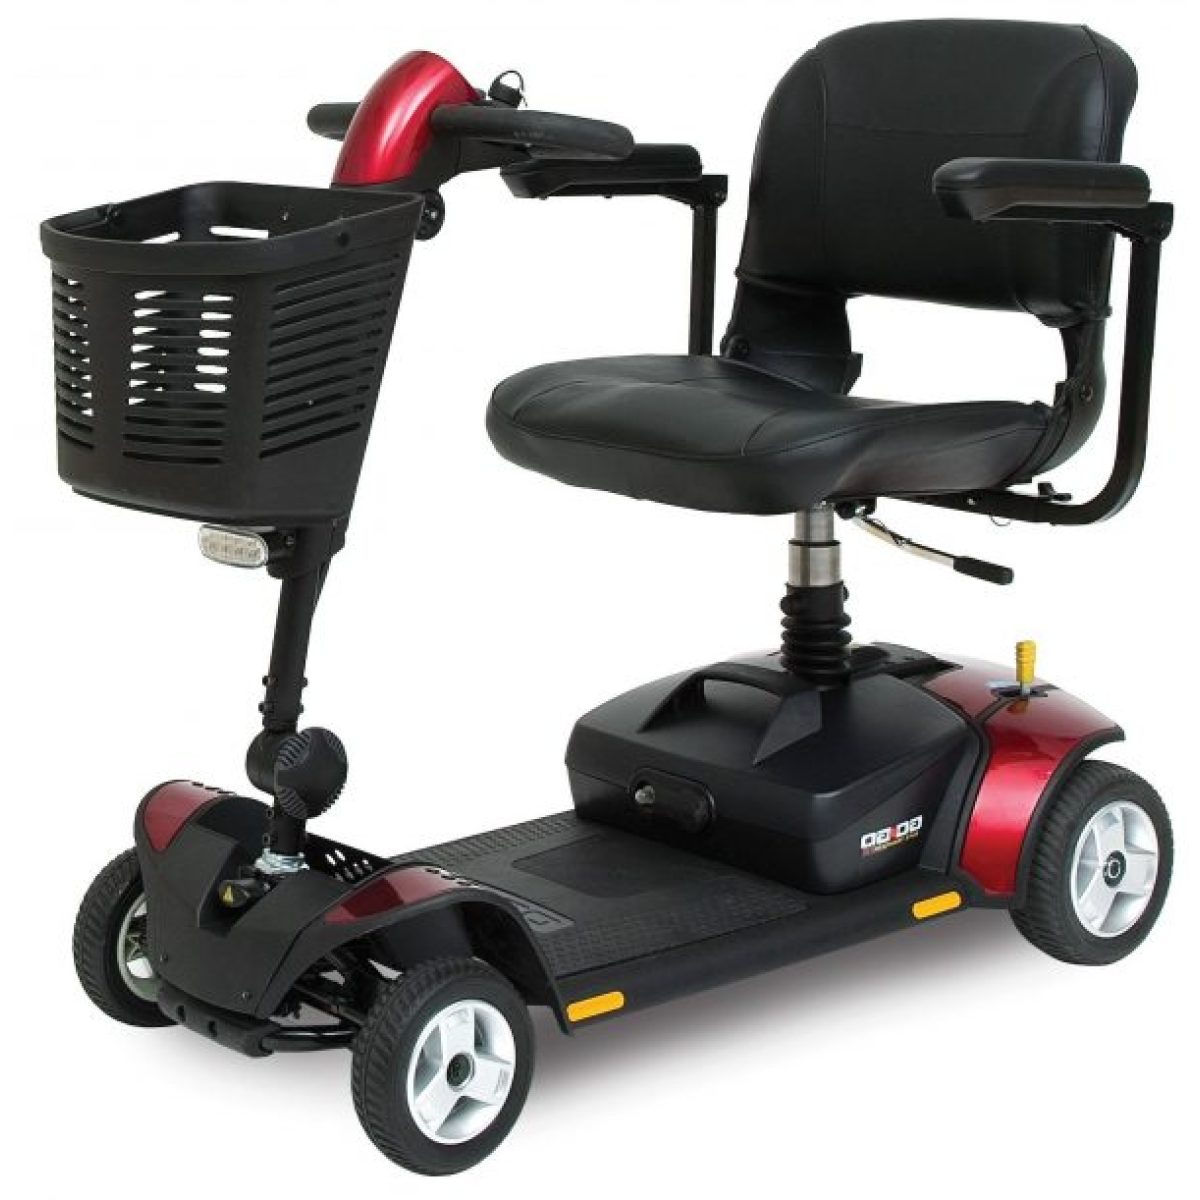 4 Wheels Mobility Scooter – Weight capacity 250 lbs.